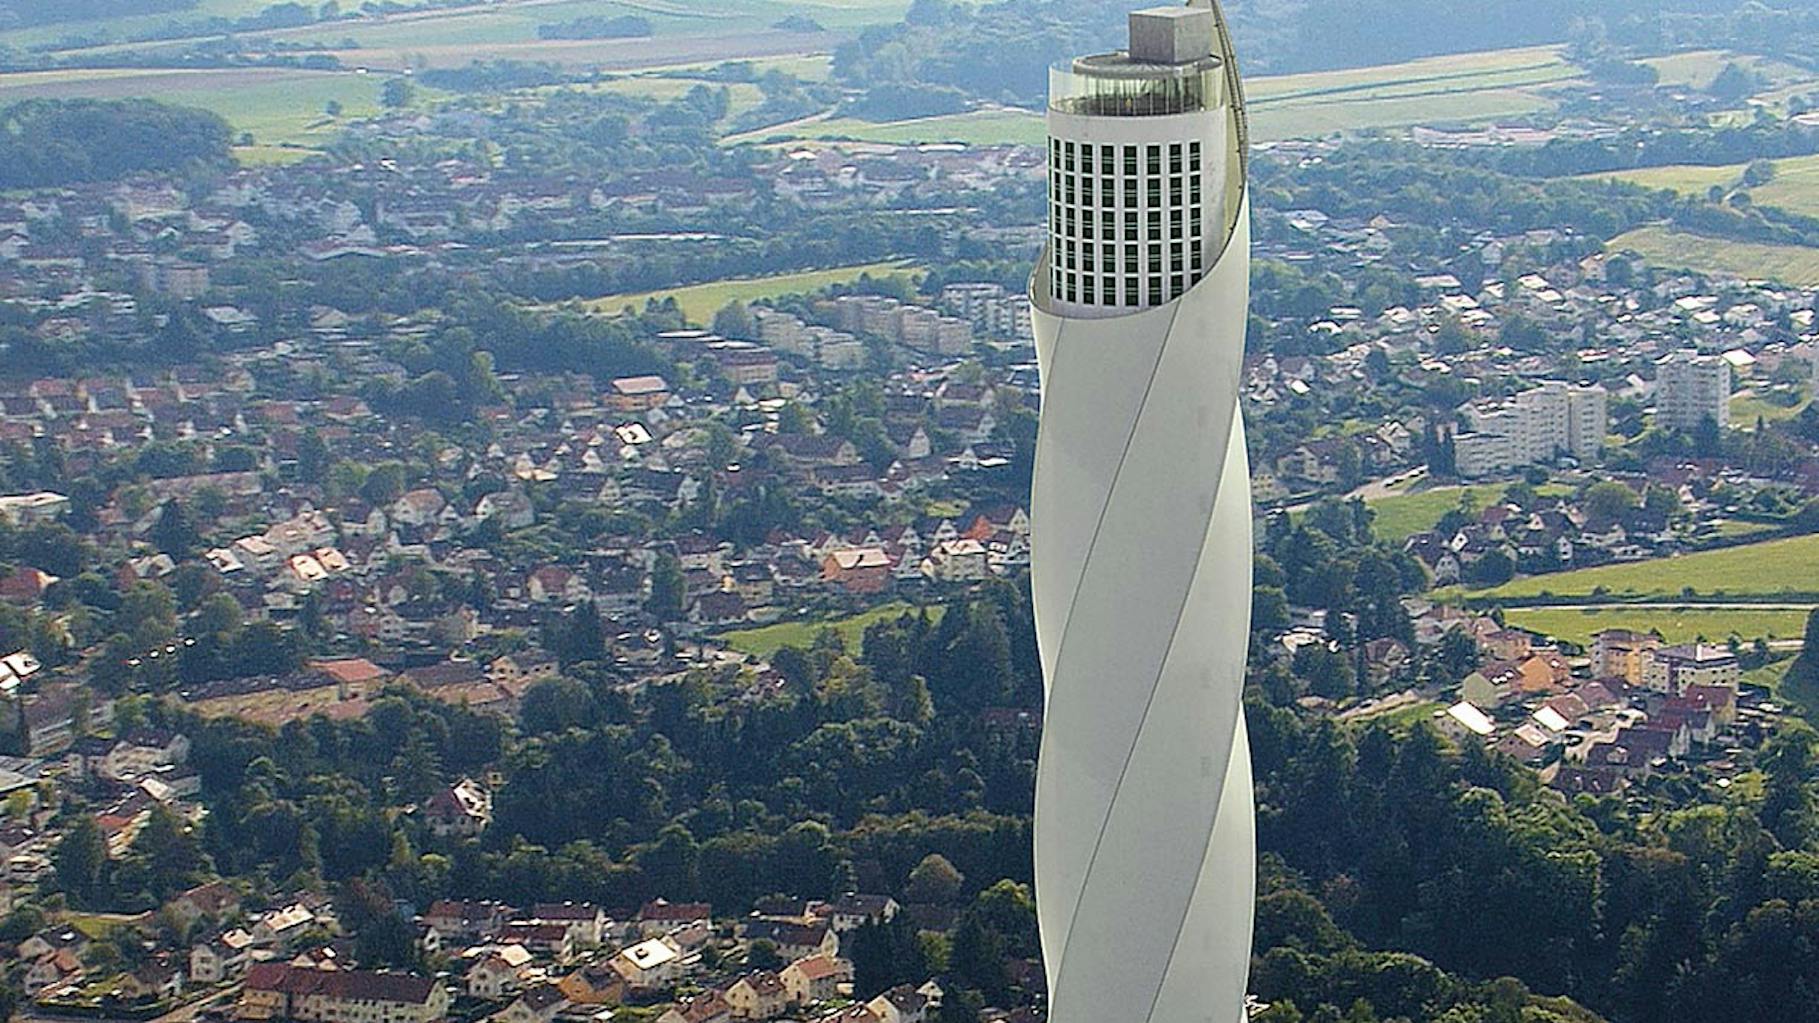 The photo shows the Thyssenkrupp lift test tower in Rottweil with a view of the surrounding landscape